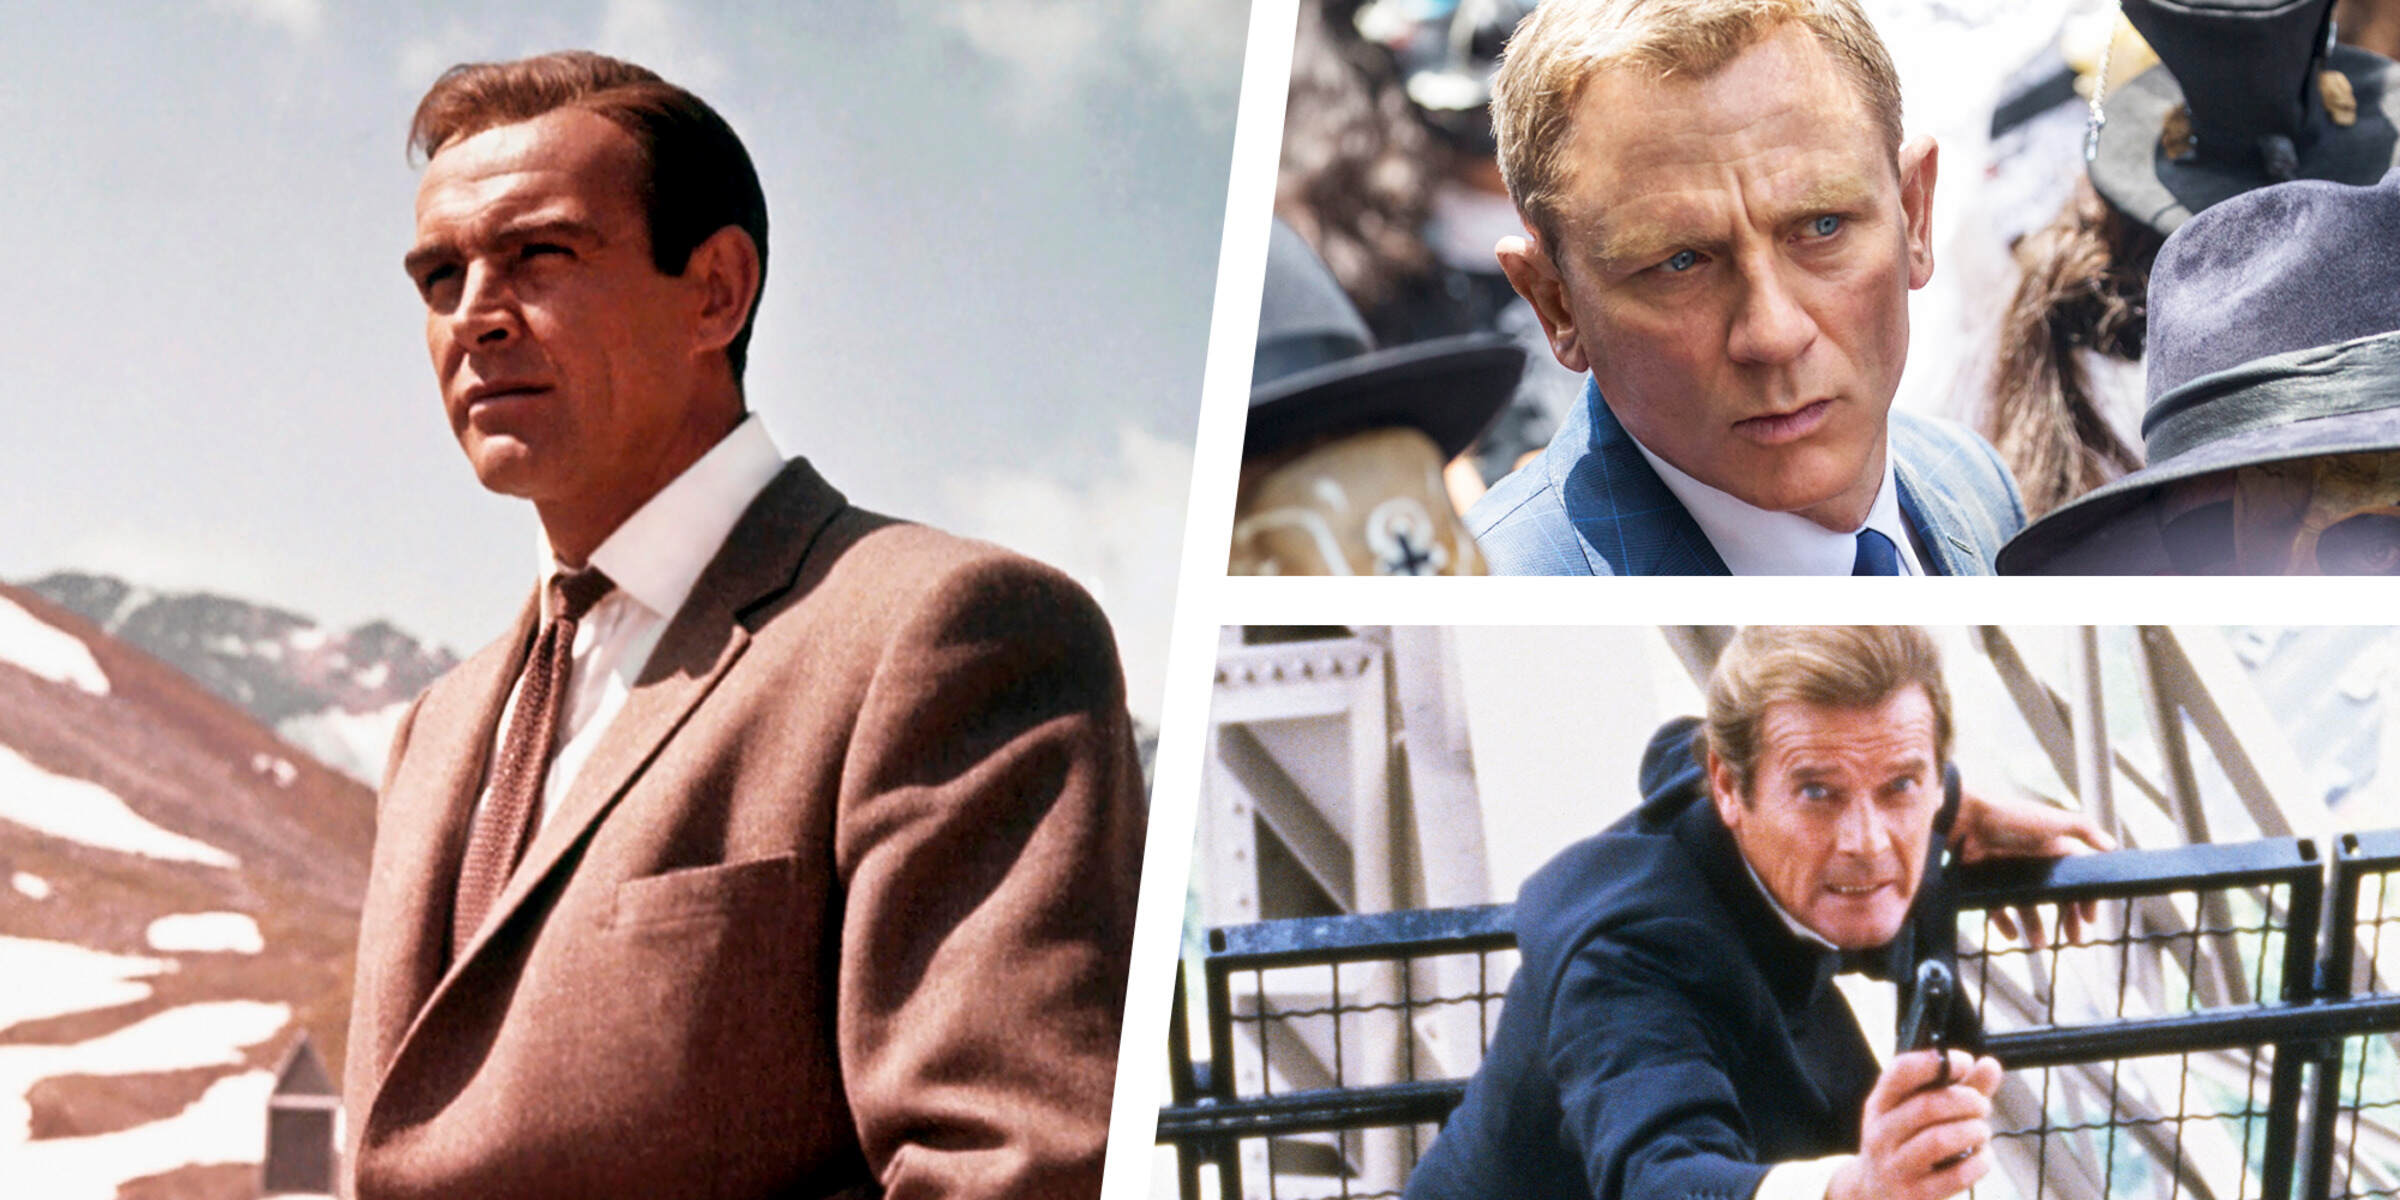 How To Watch The James Bond Movies In Order